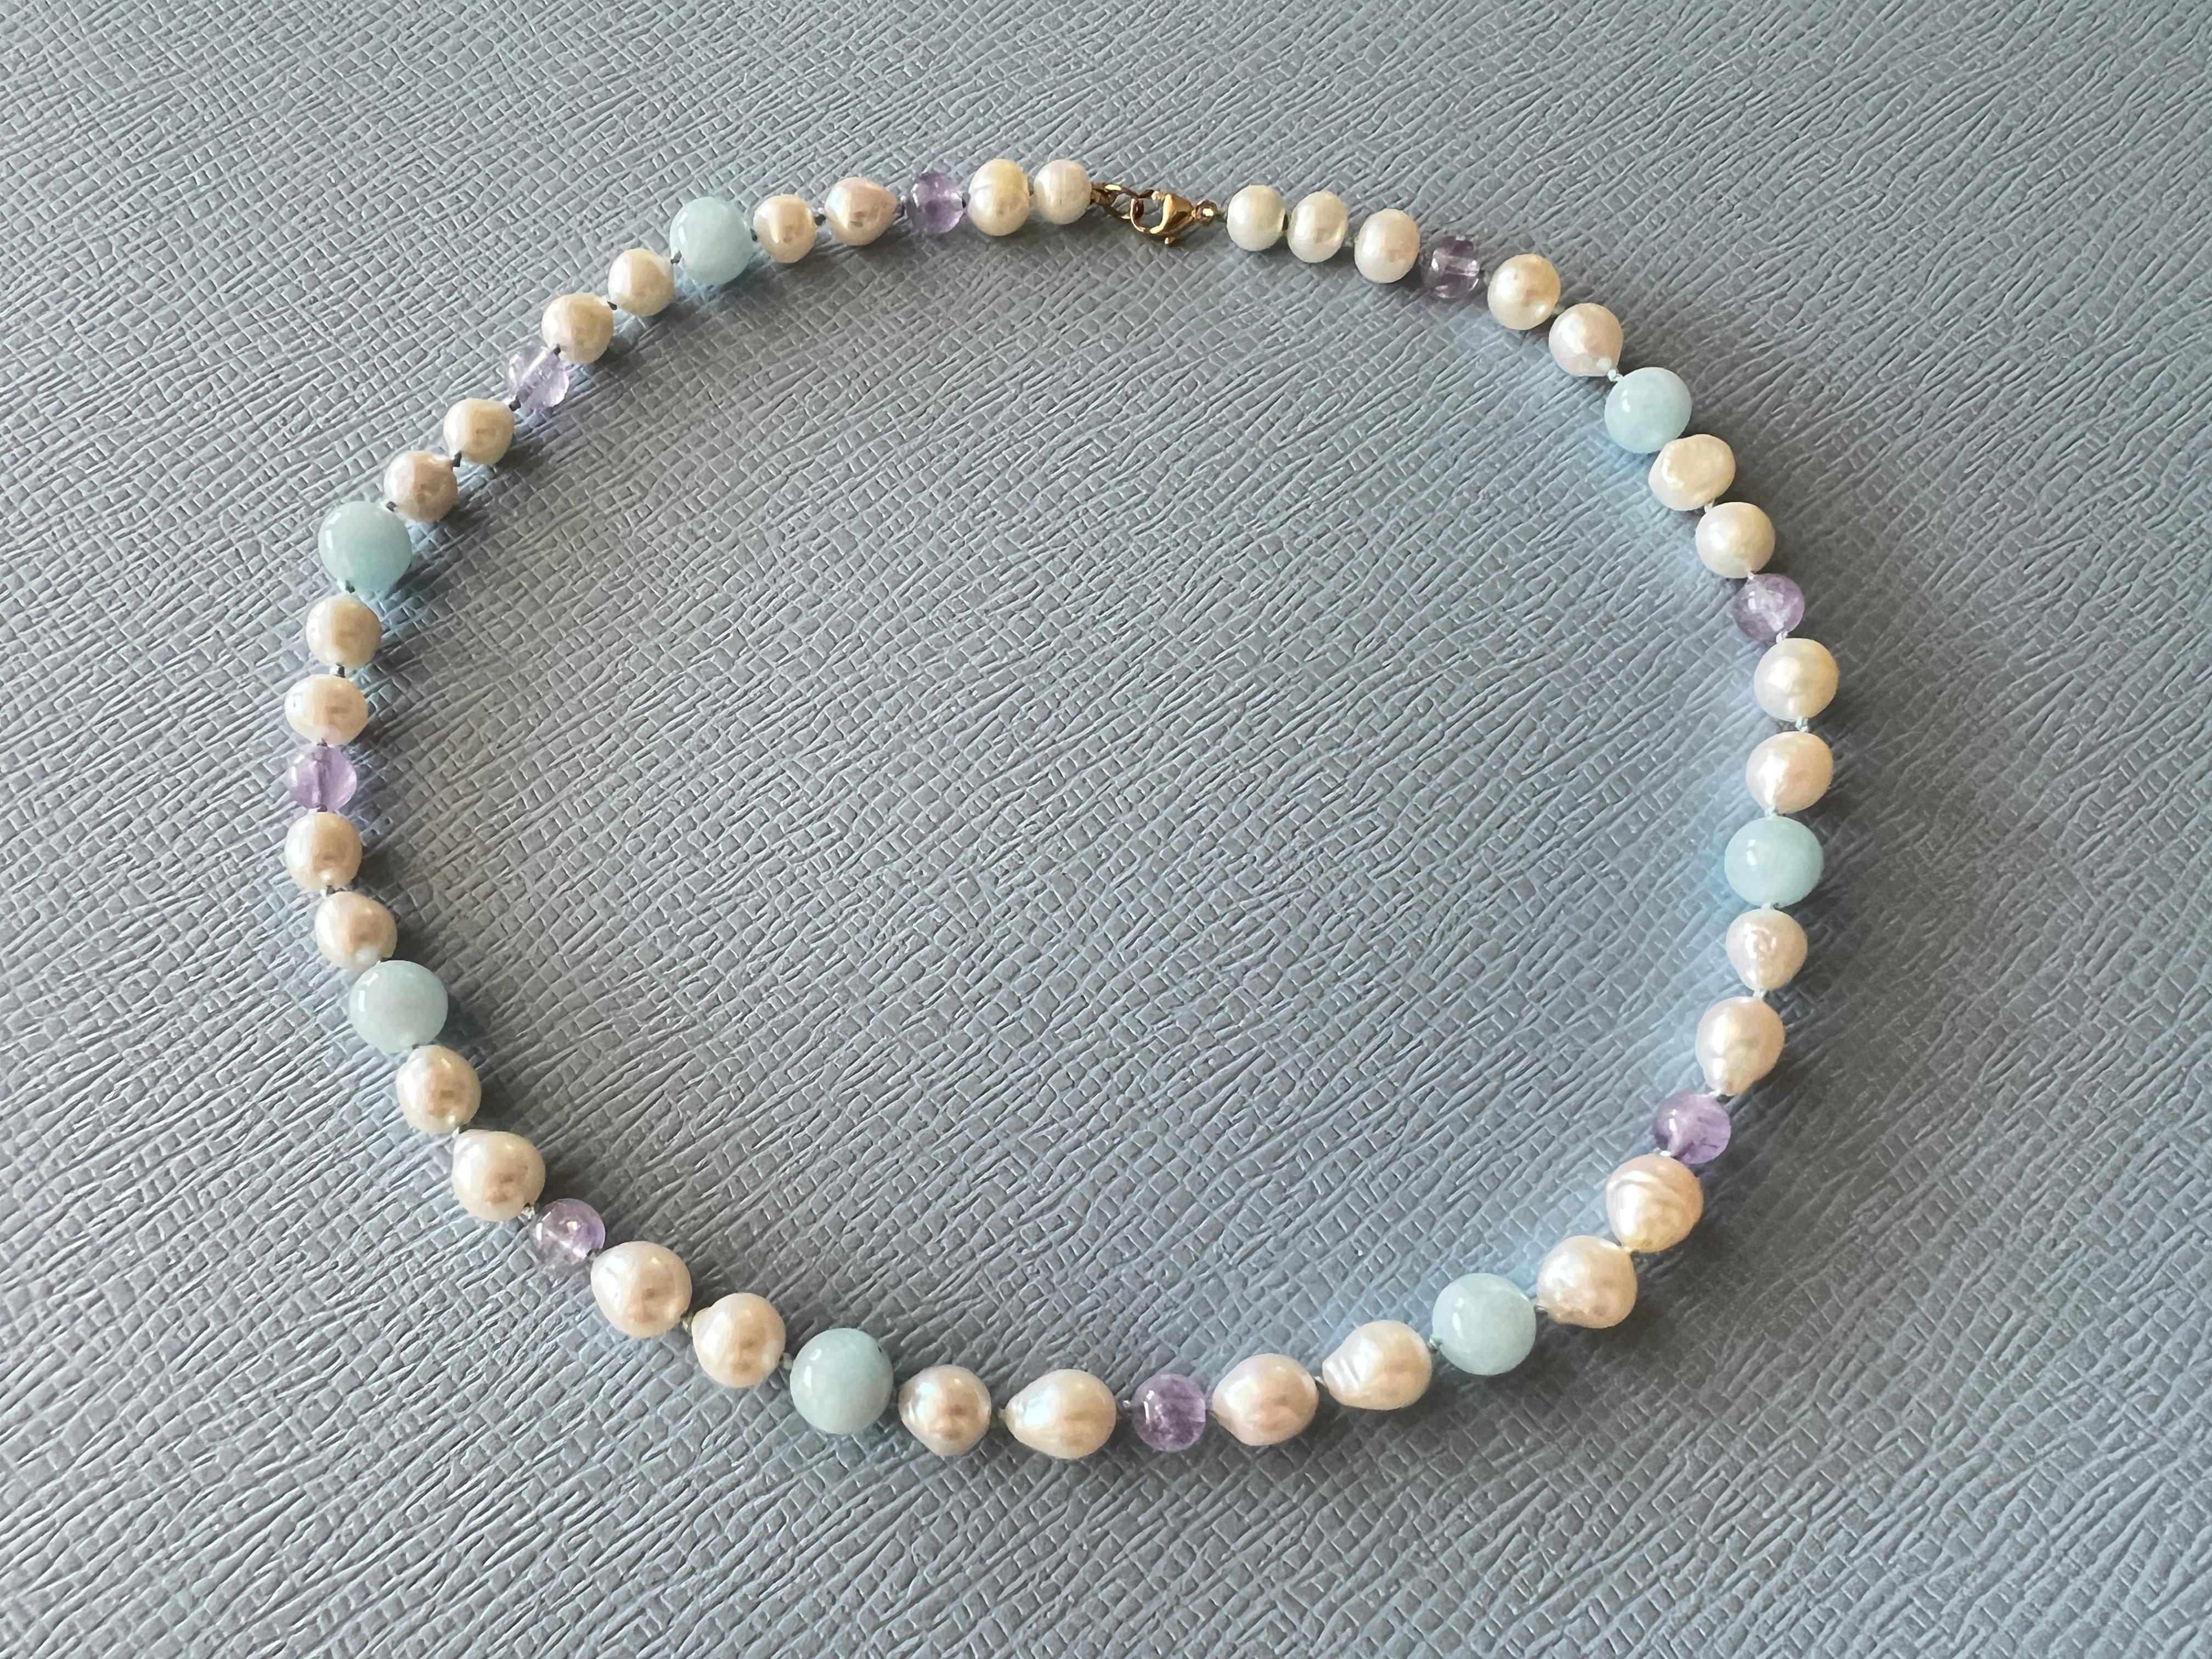 Aquamarine Amethyst Pearl Choker Bead Necklace Gold Filled J Dauphin For Sale 1